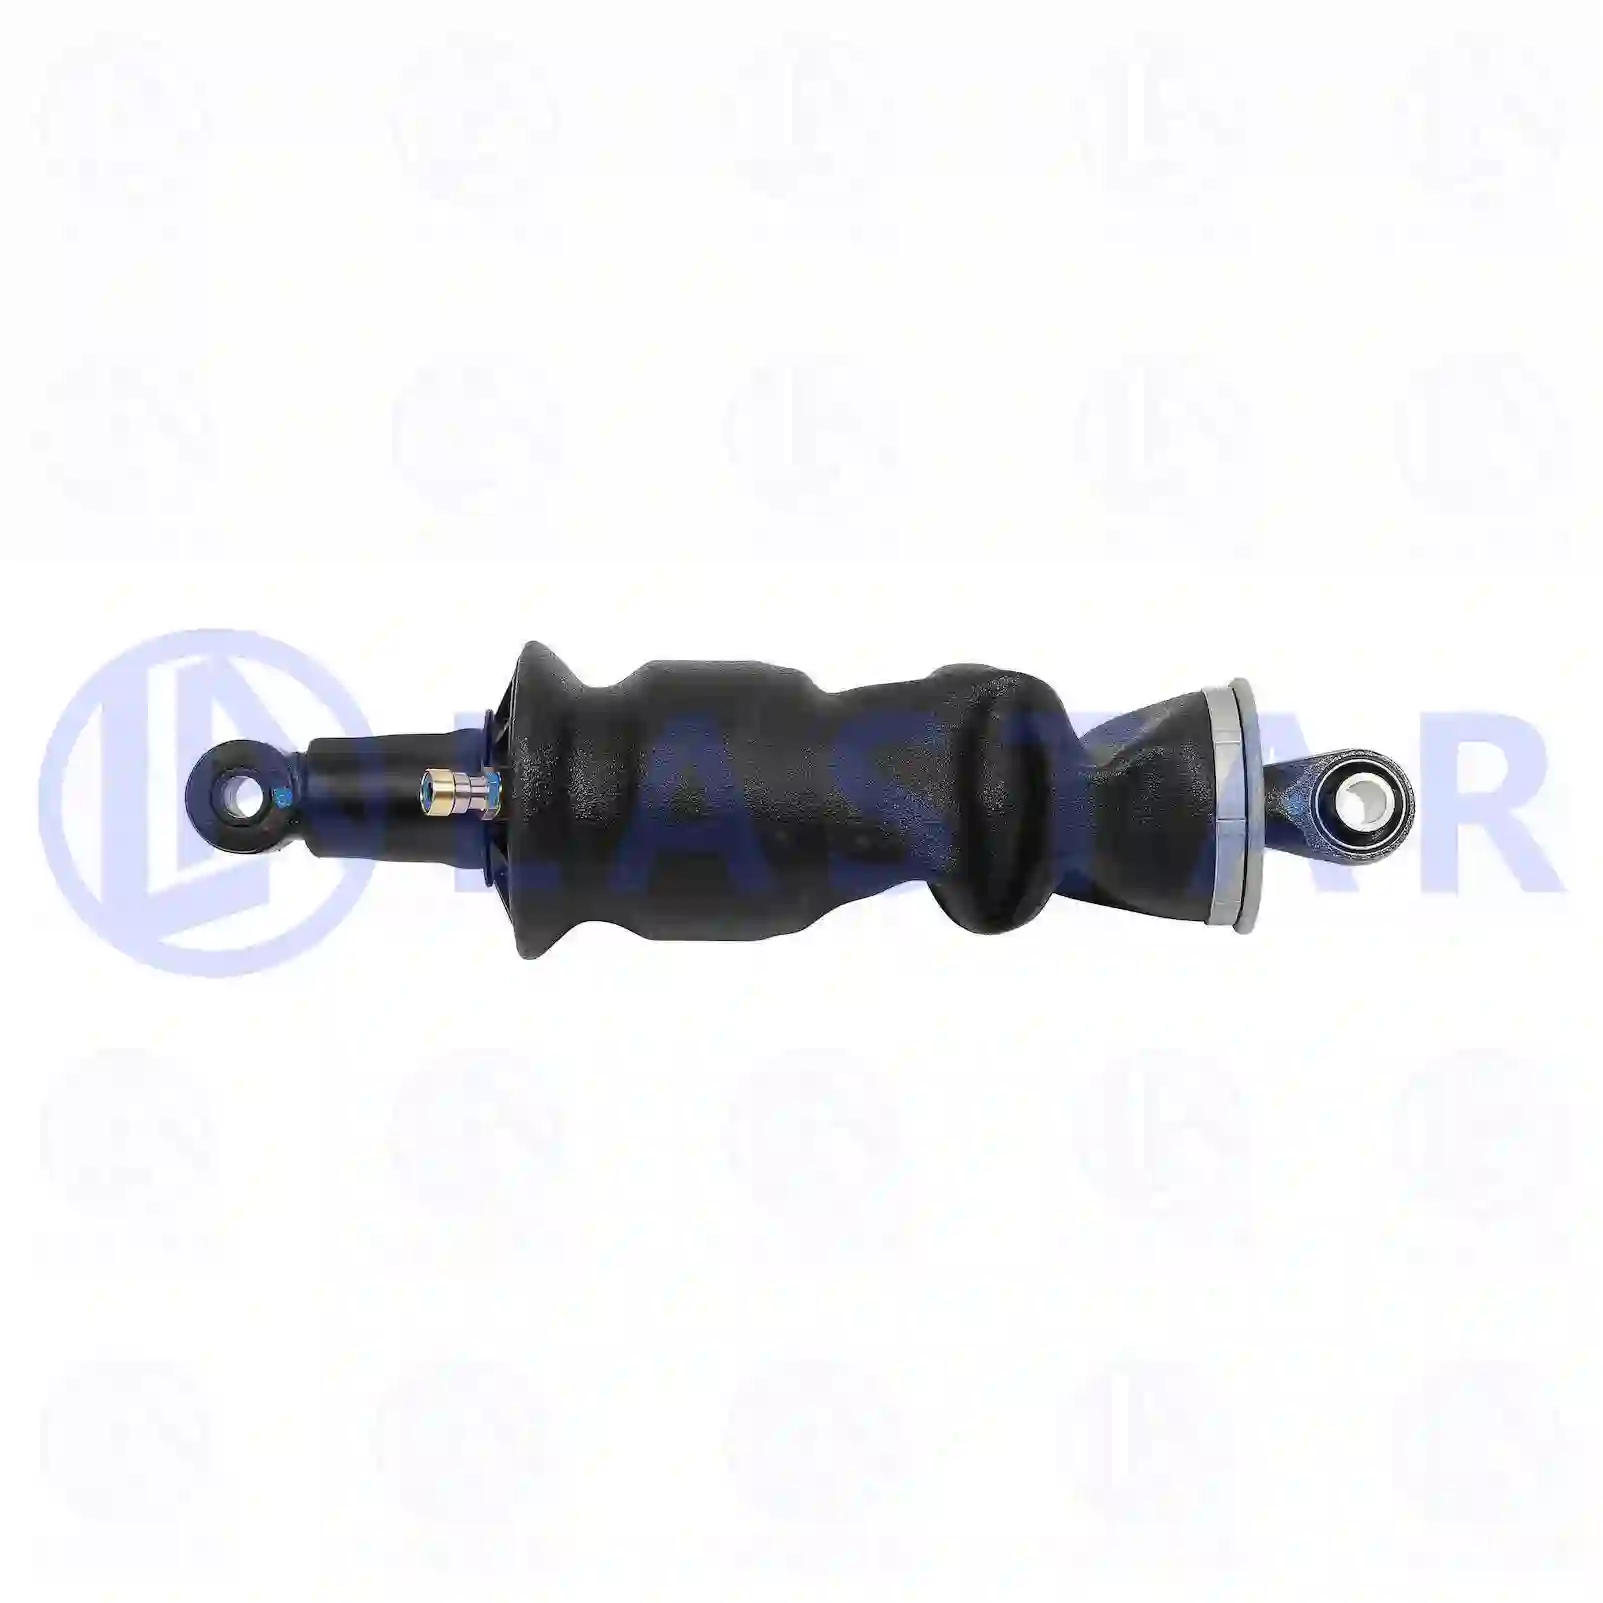 Cabin shock absorber, with air bellow, 77735784, 7421821027, 21171976, 22040666, ||  77735784 Lastar Spare Part | Truck Spare Parts, Auotomotive Spare Parts Cabin shock absorber, with air bellow, 77735784, 7421821027, 21171976, 22040666, ||  77735784 Lastar Spare Part | Truck Spare Parts, Auotomotive Spare Parts